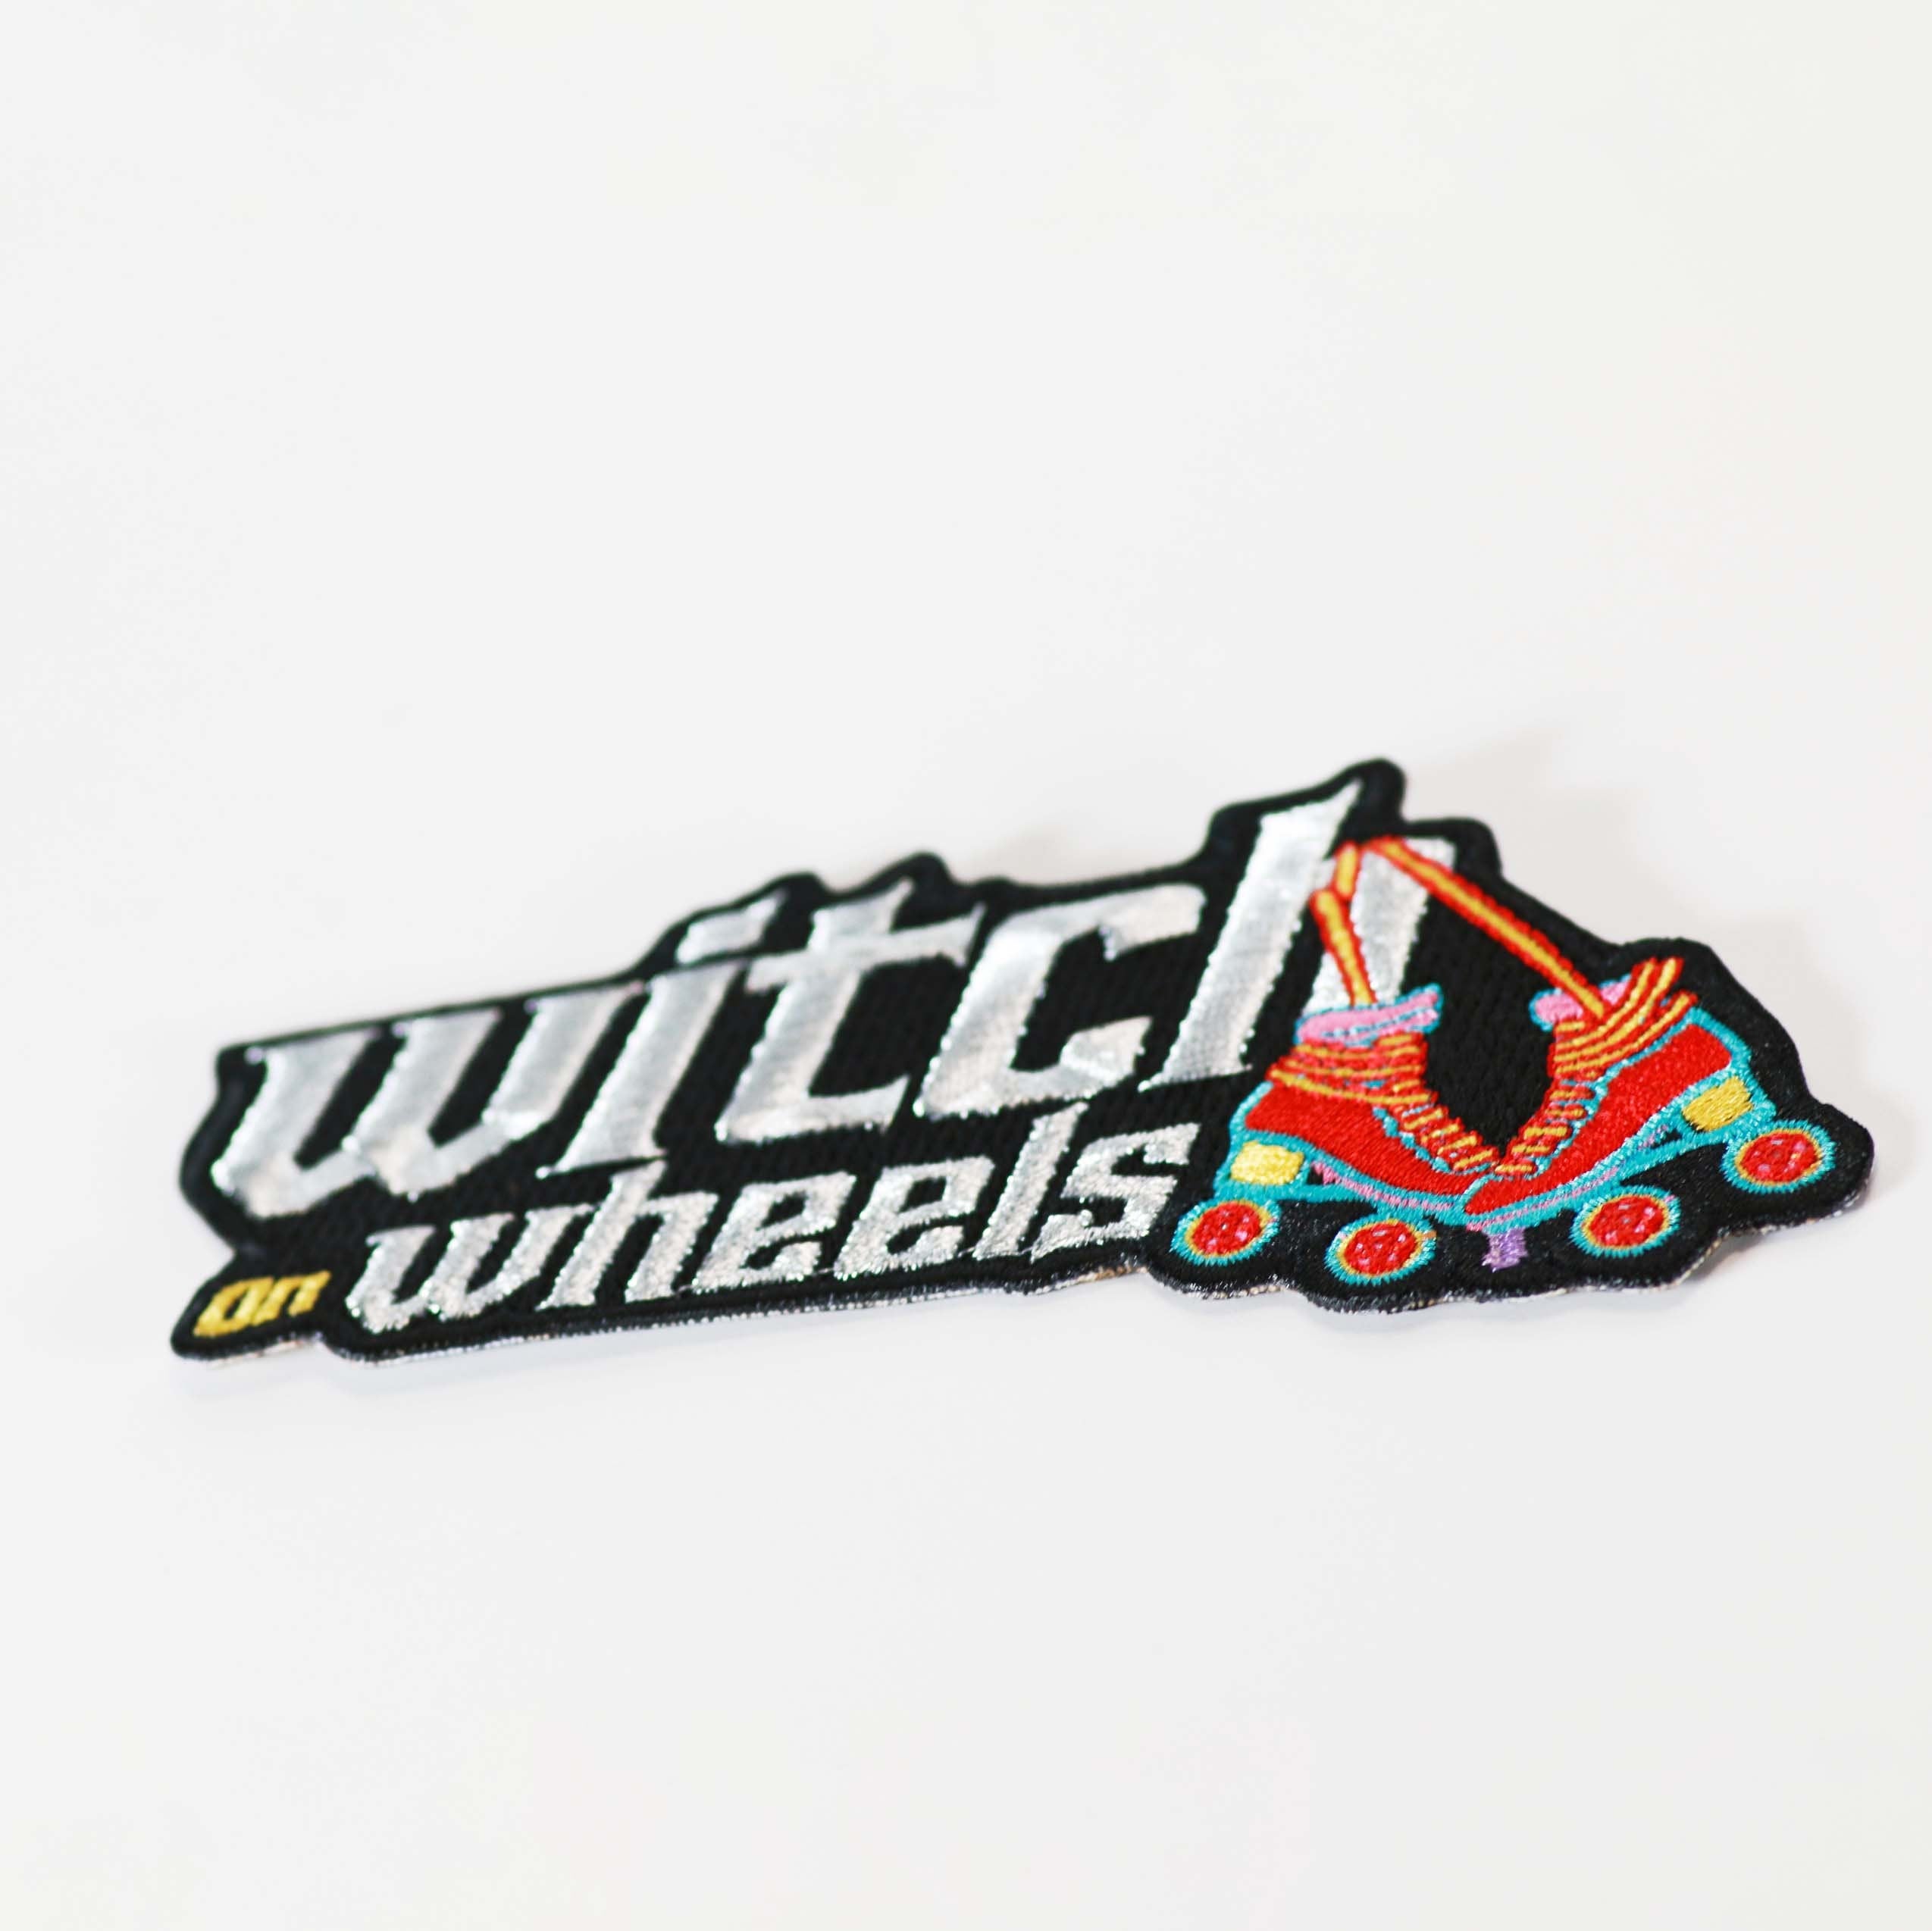 Witch on Wheels Roller Skate Patch